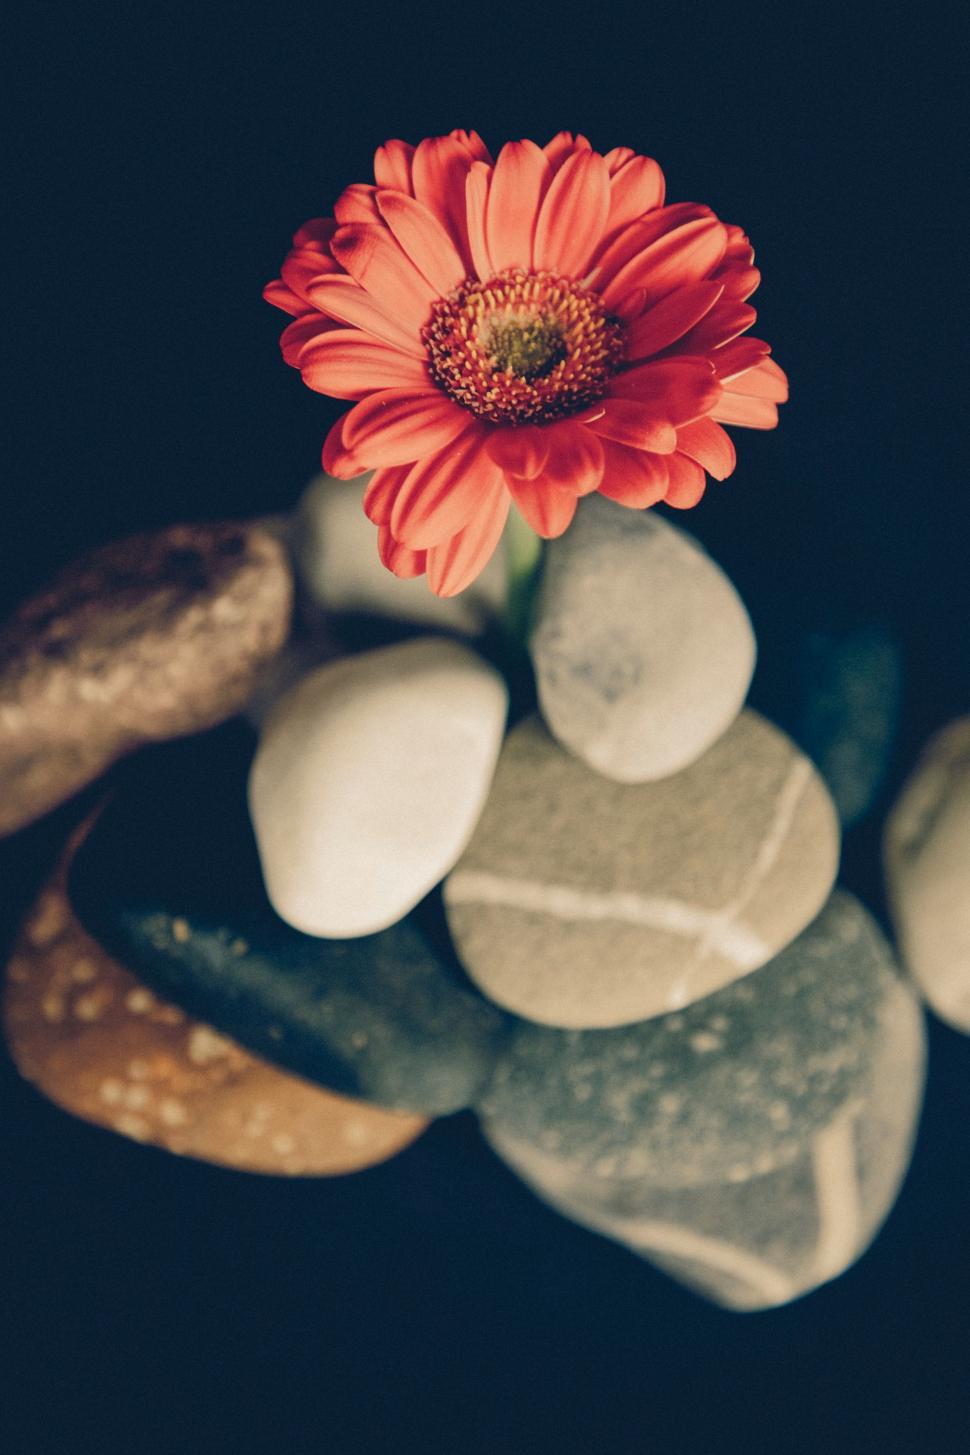 Free Image of Red Flower on Pile of Rocks 